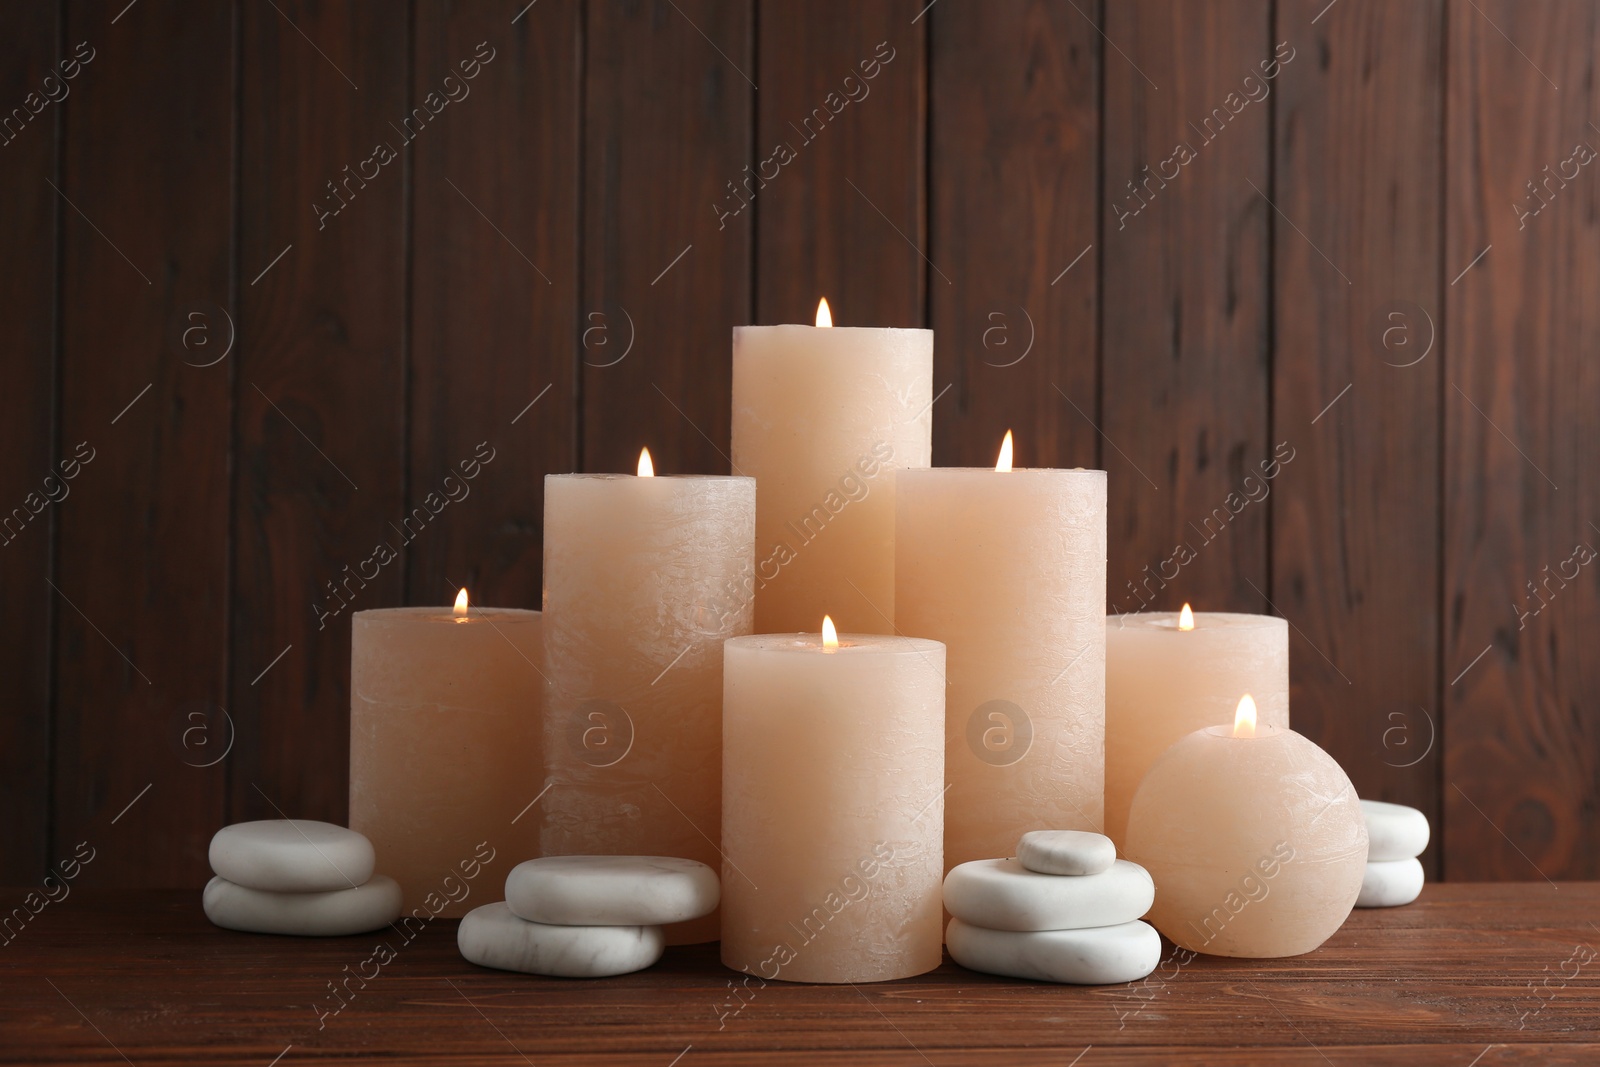 Photo of Composition with burning candles on table against wooden background